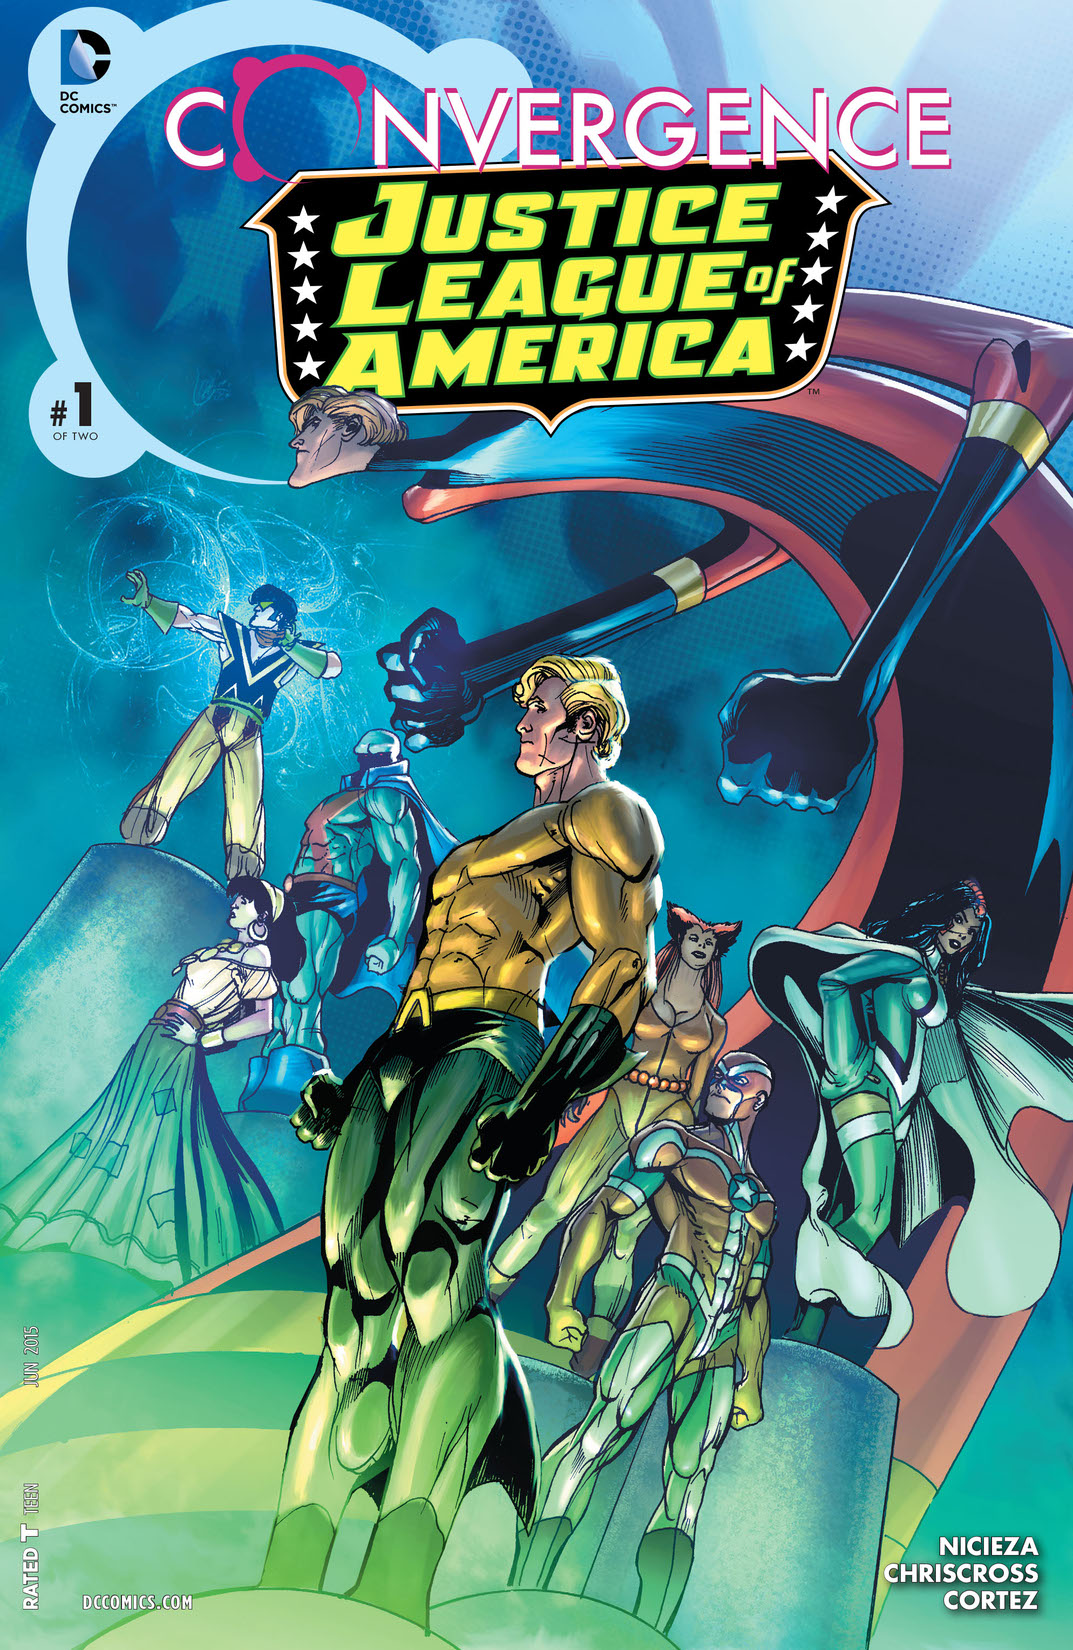 Convergence: Justice League of America #1 preview images